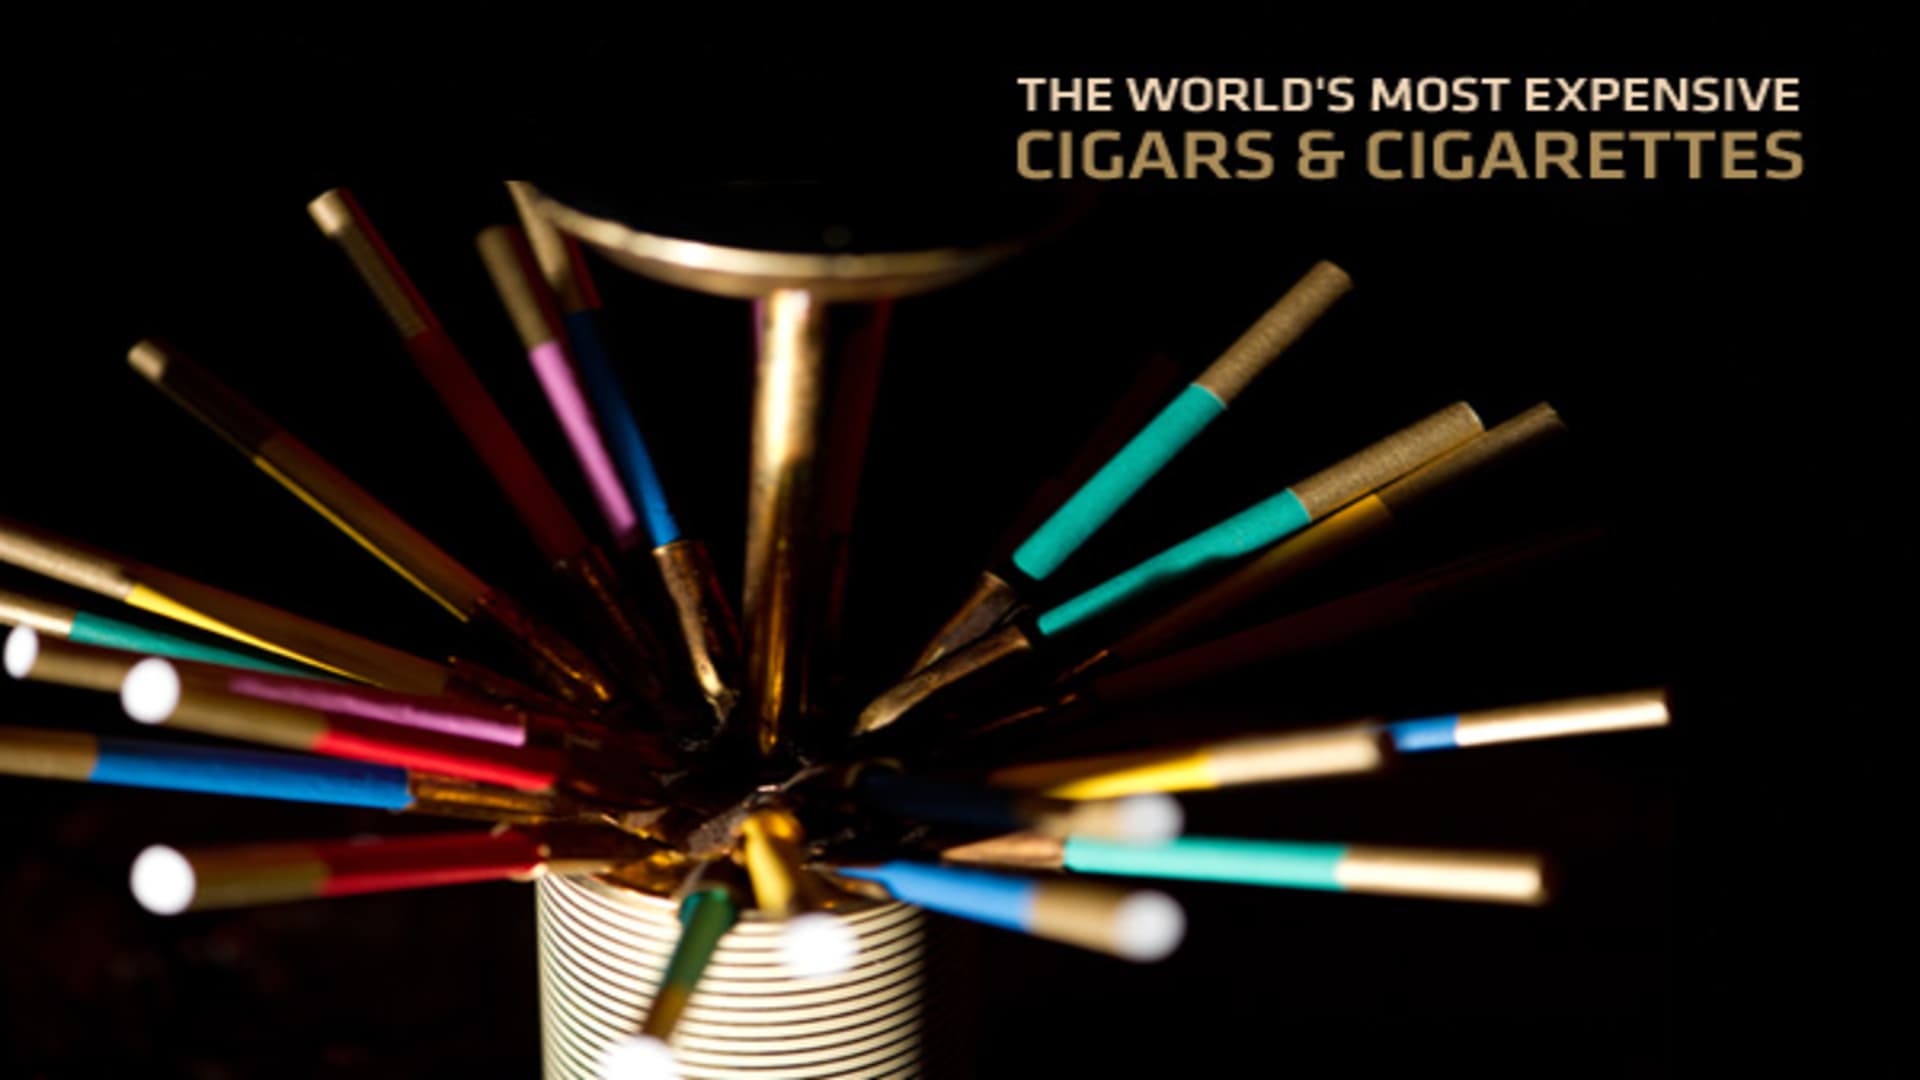 The World's Most Expensive Cigars and Cigarettes